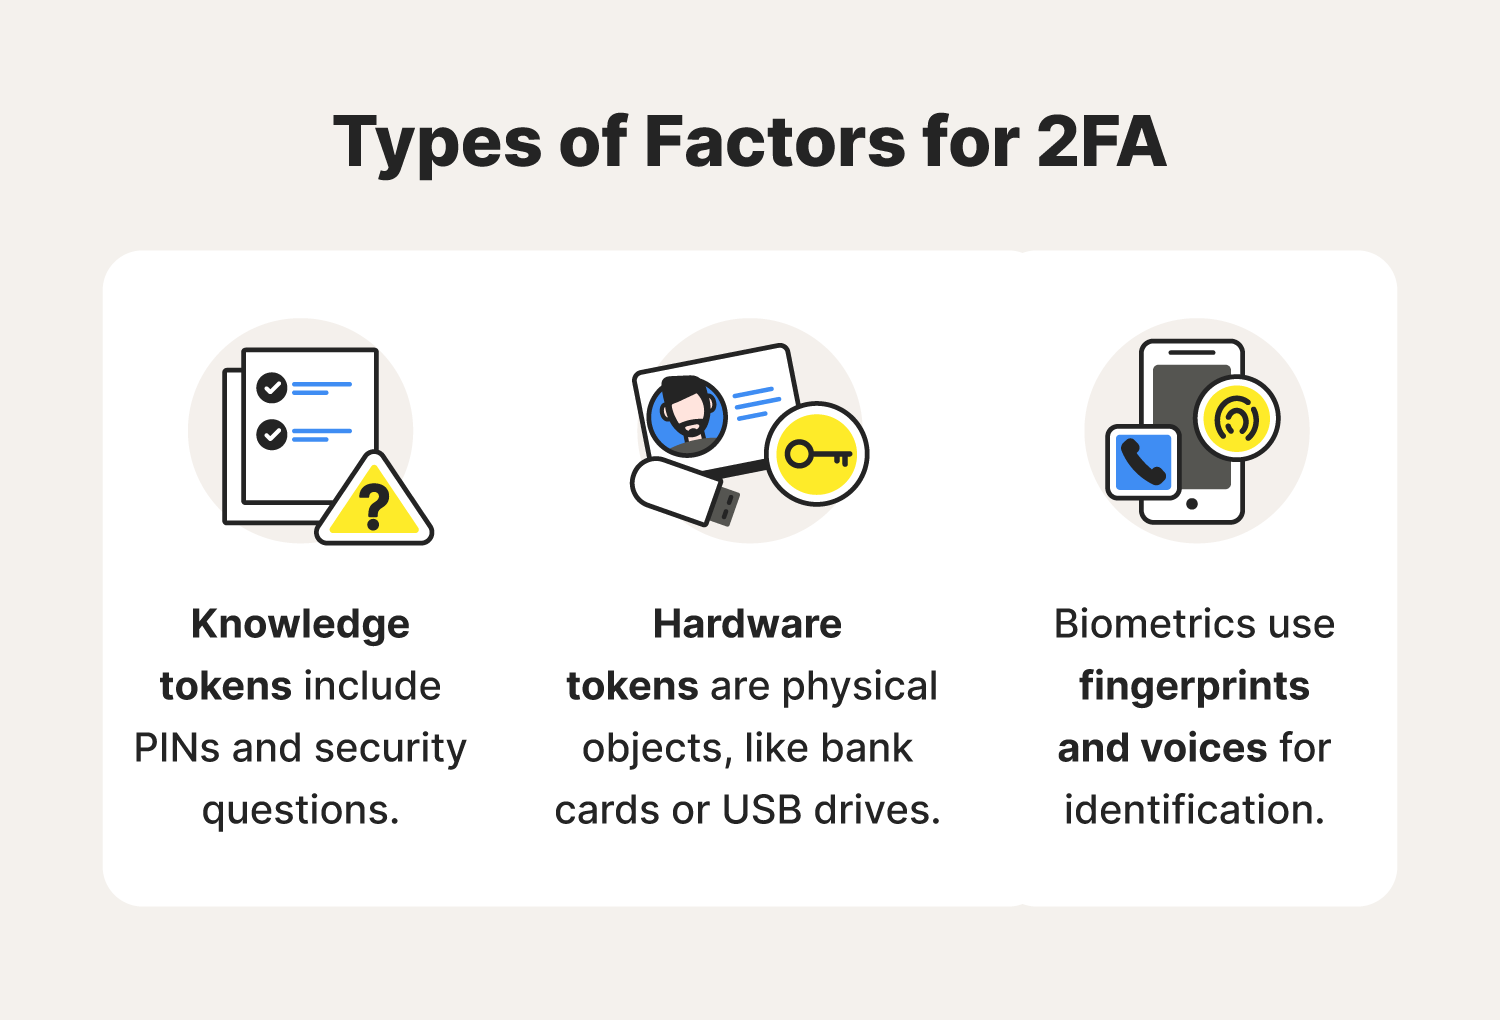 Three illustrations accompany the different types of 2FA to help people answer “What is 2FA?”